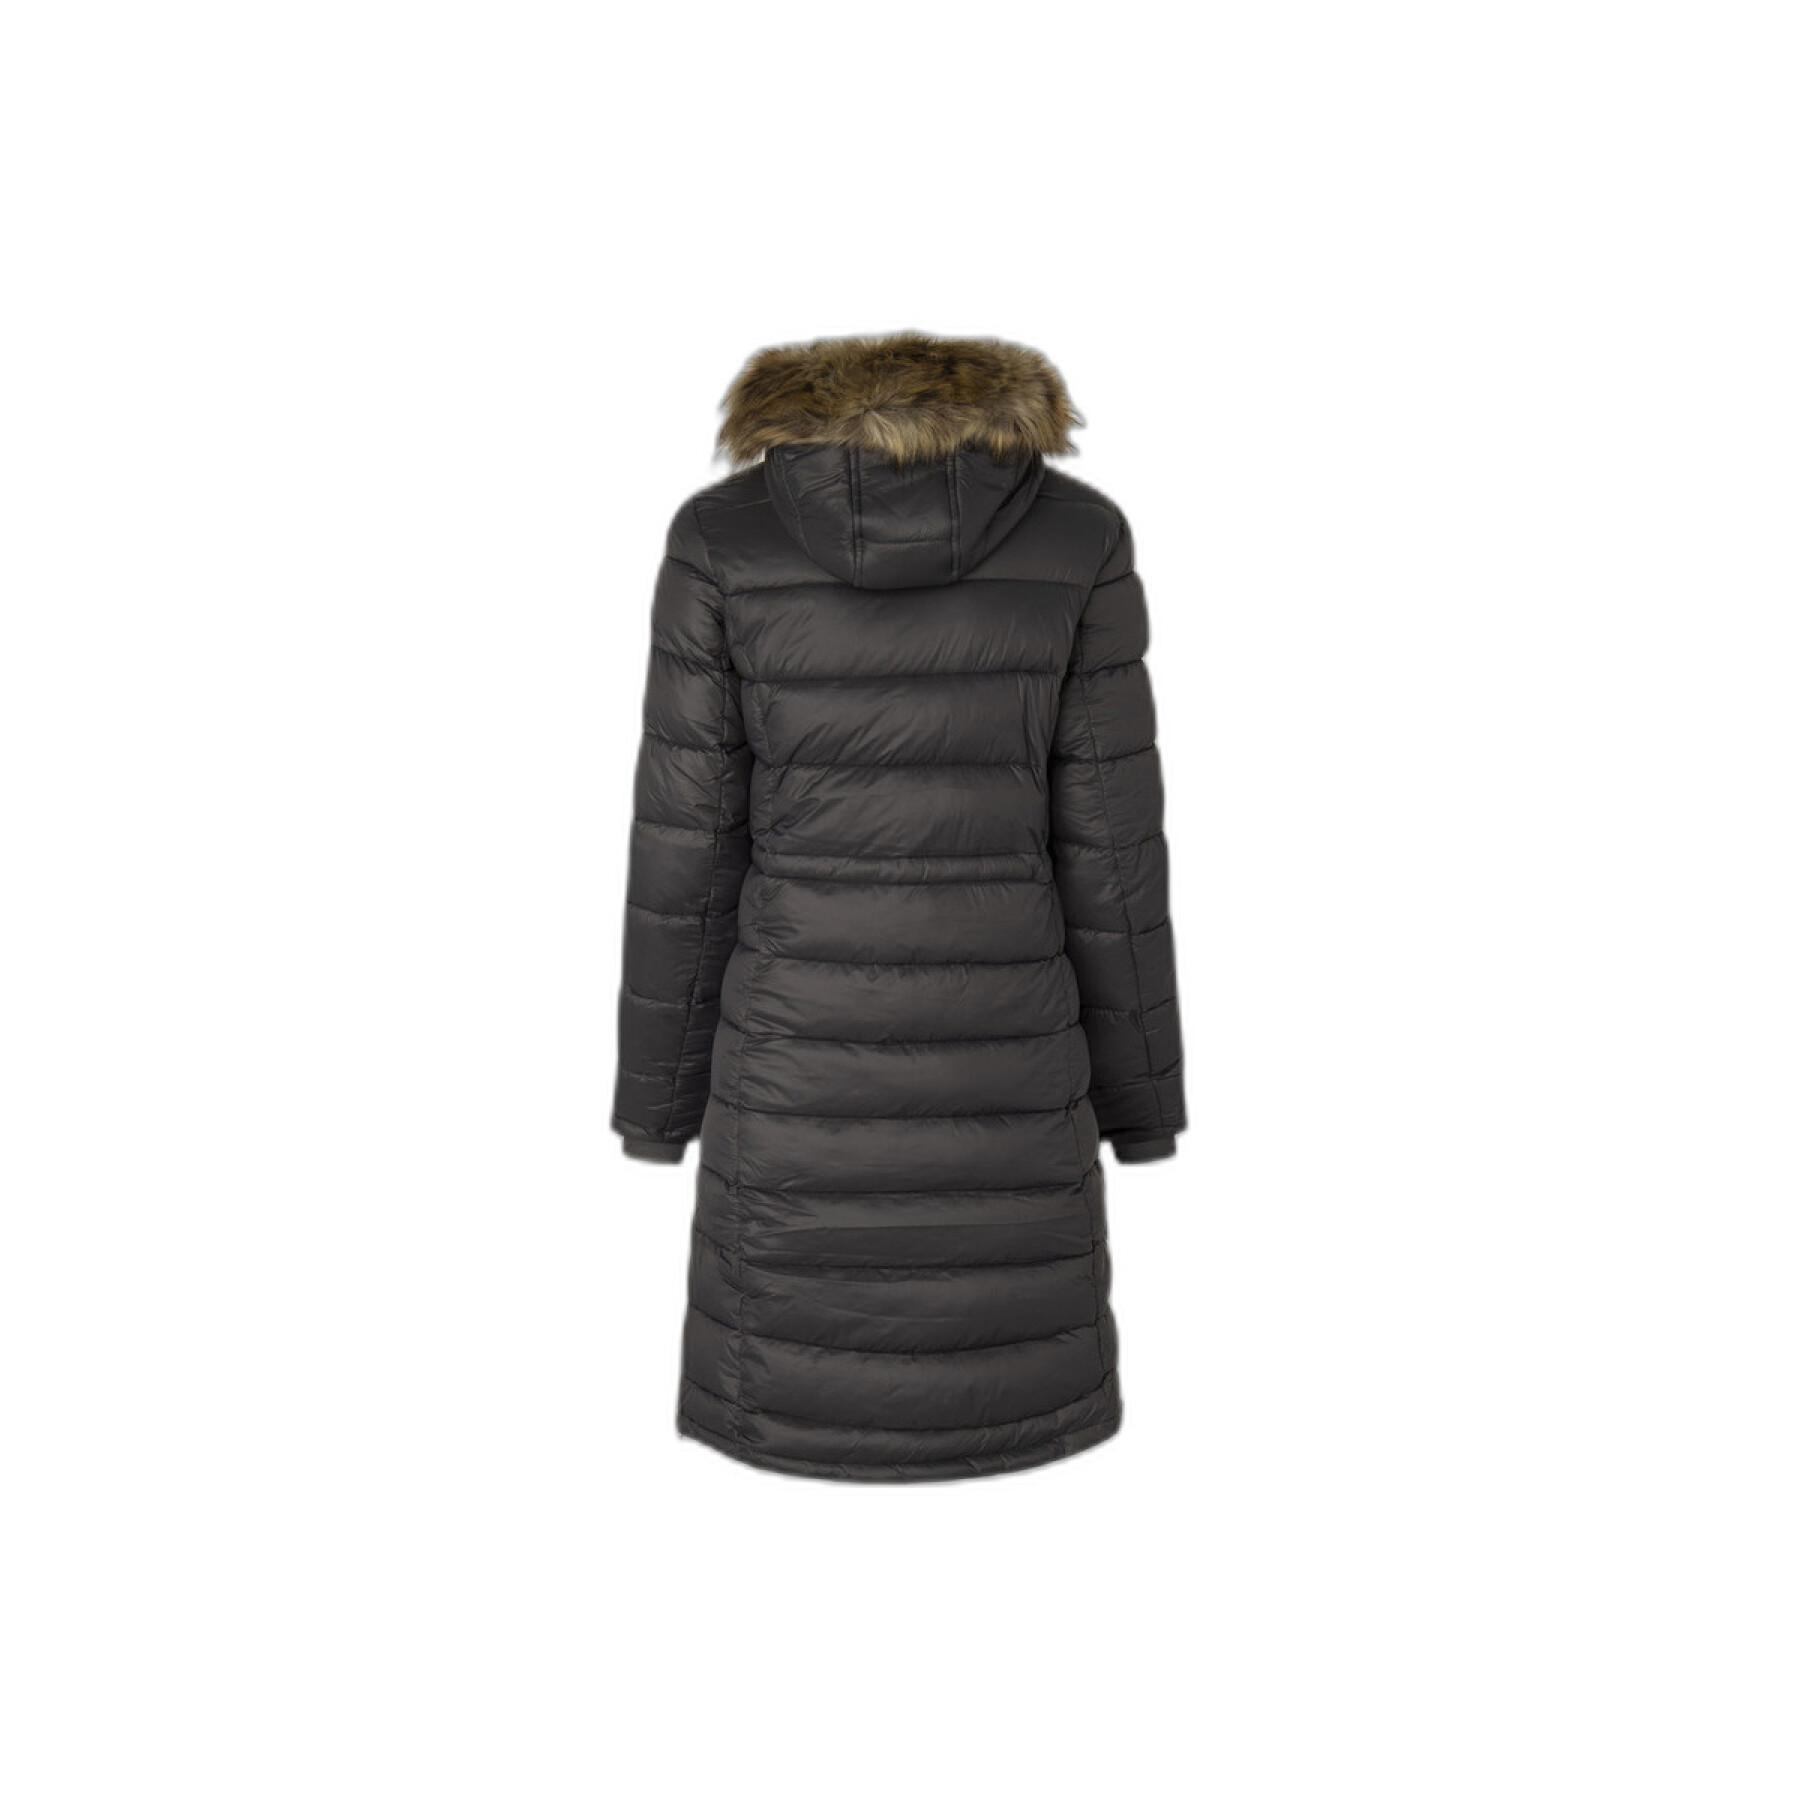 Long Puffer Jacket Pepe Jeans May